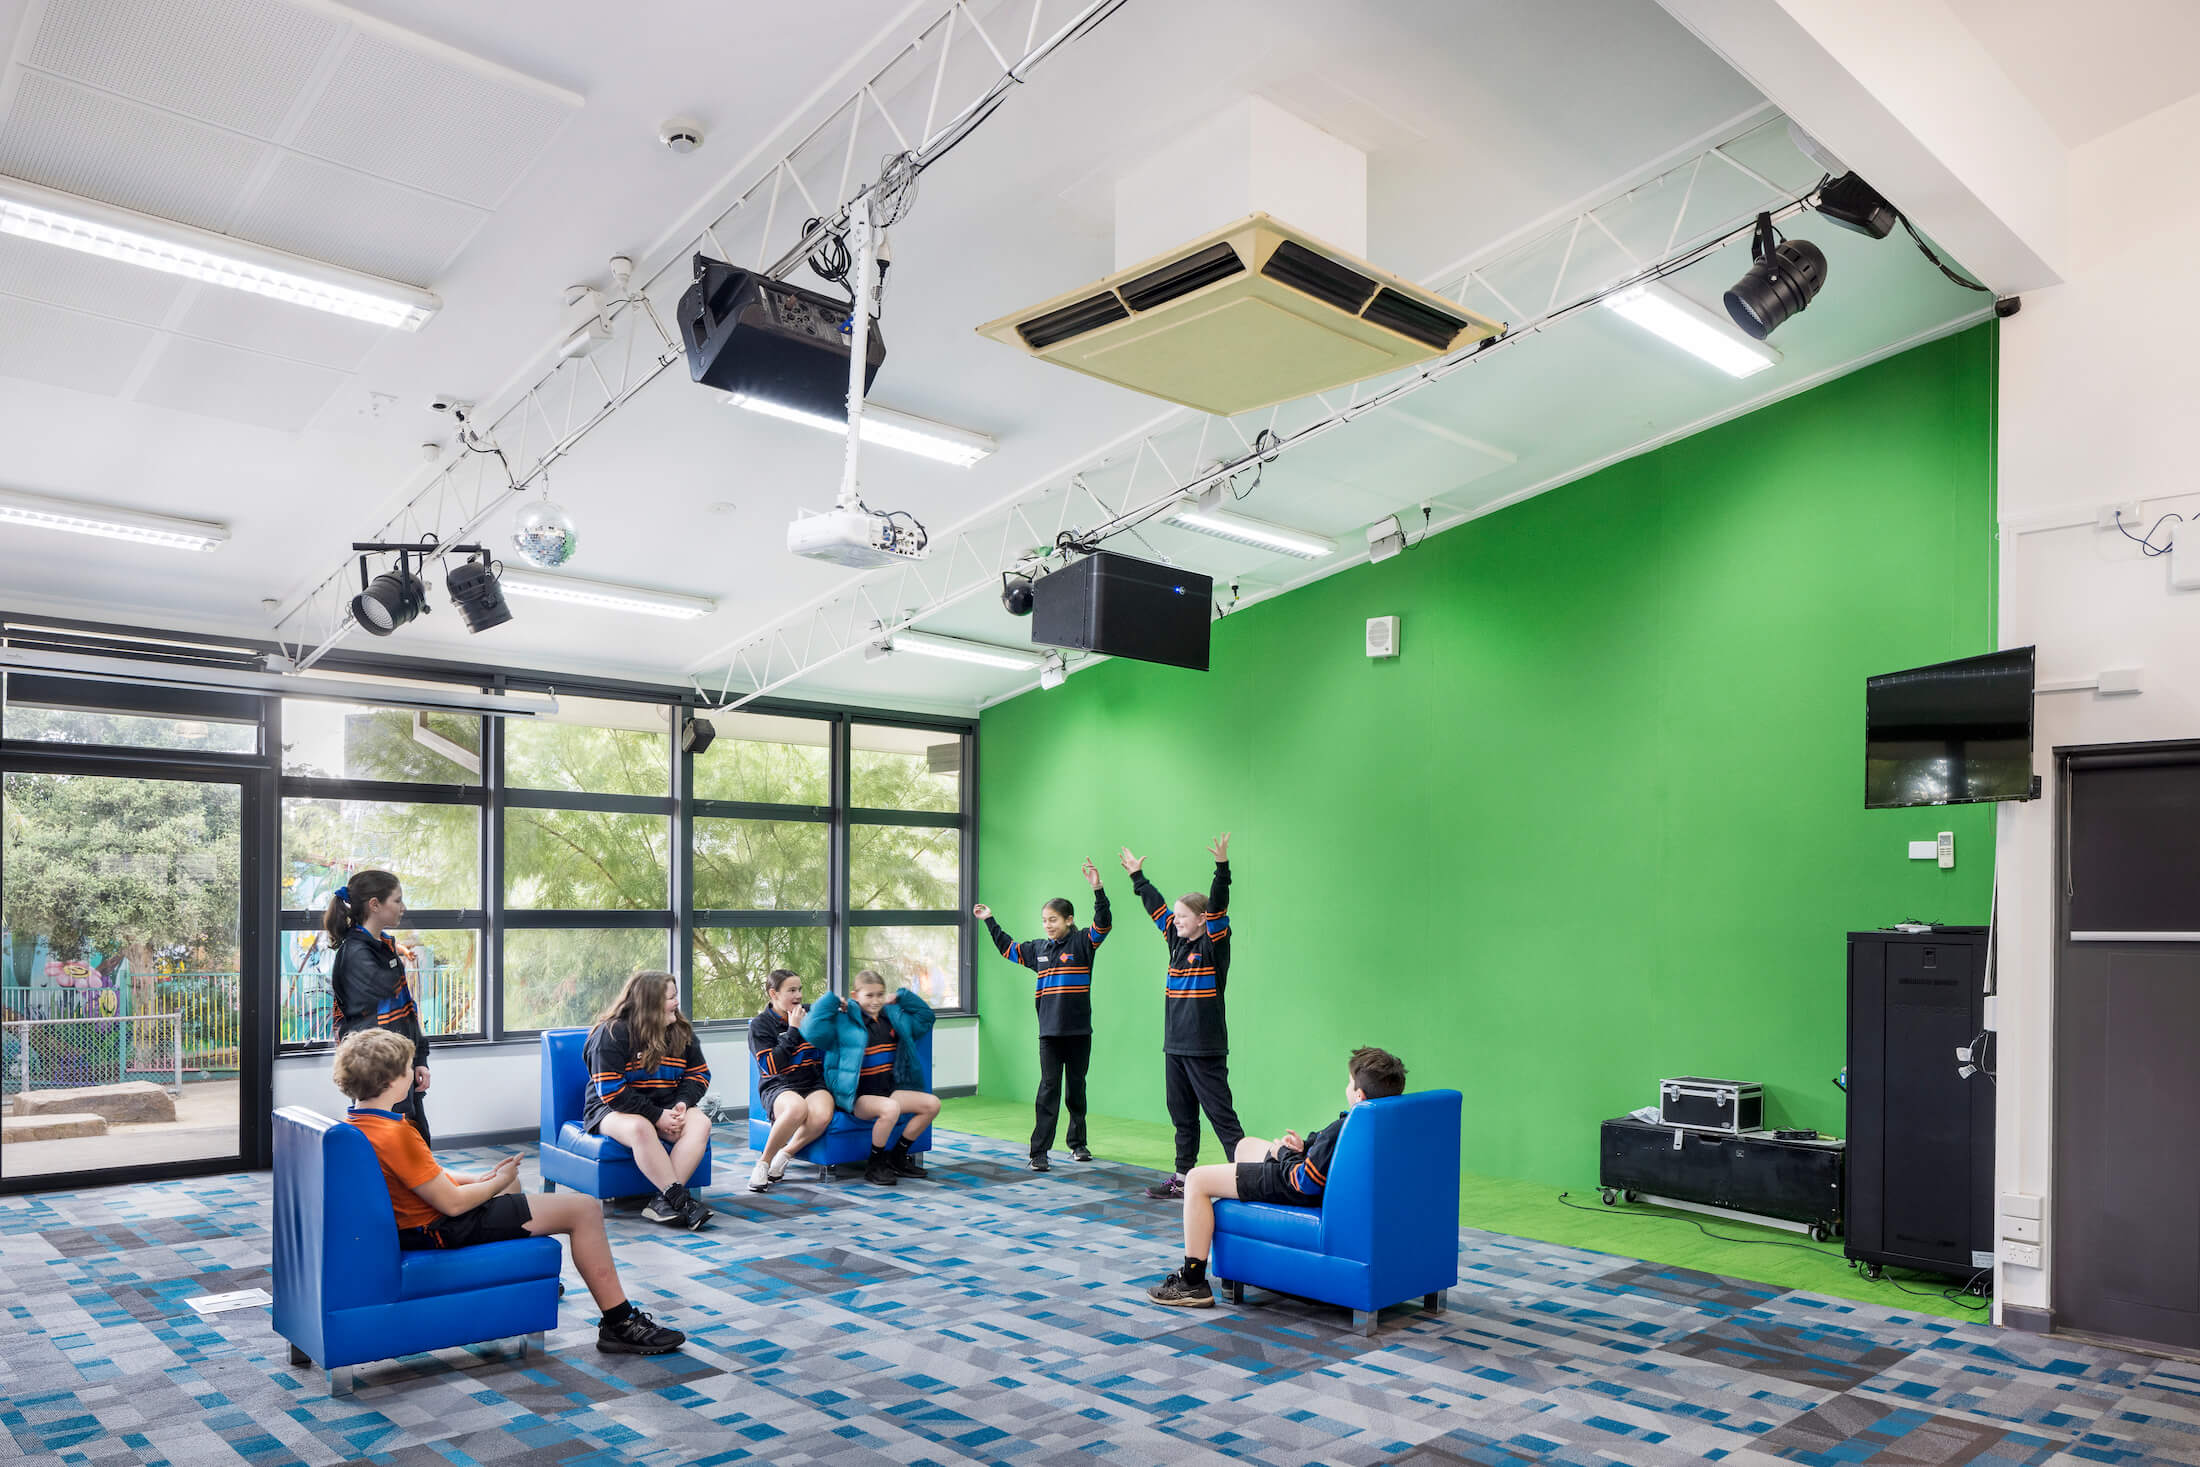 Students perform in front of a green screen wall in a media room